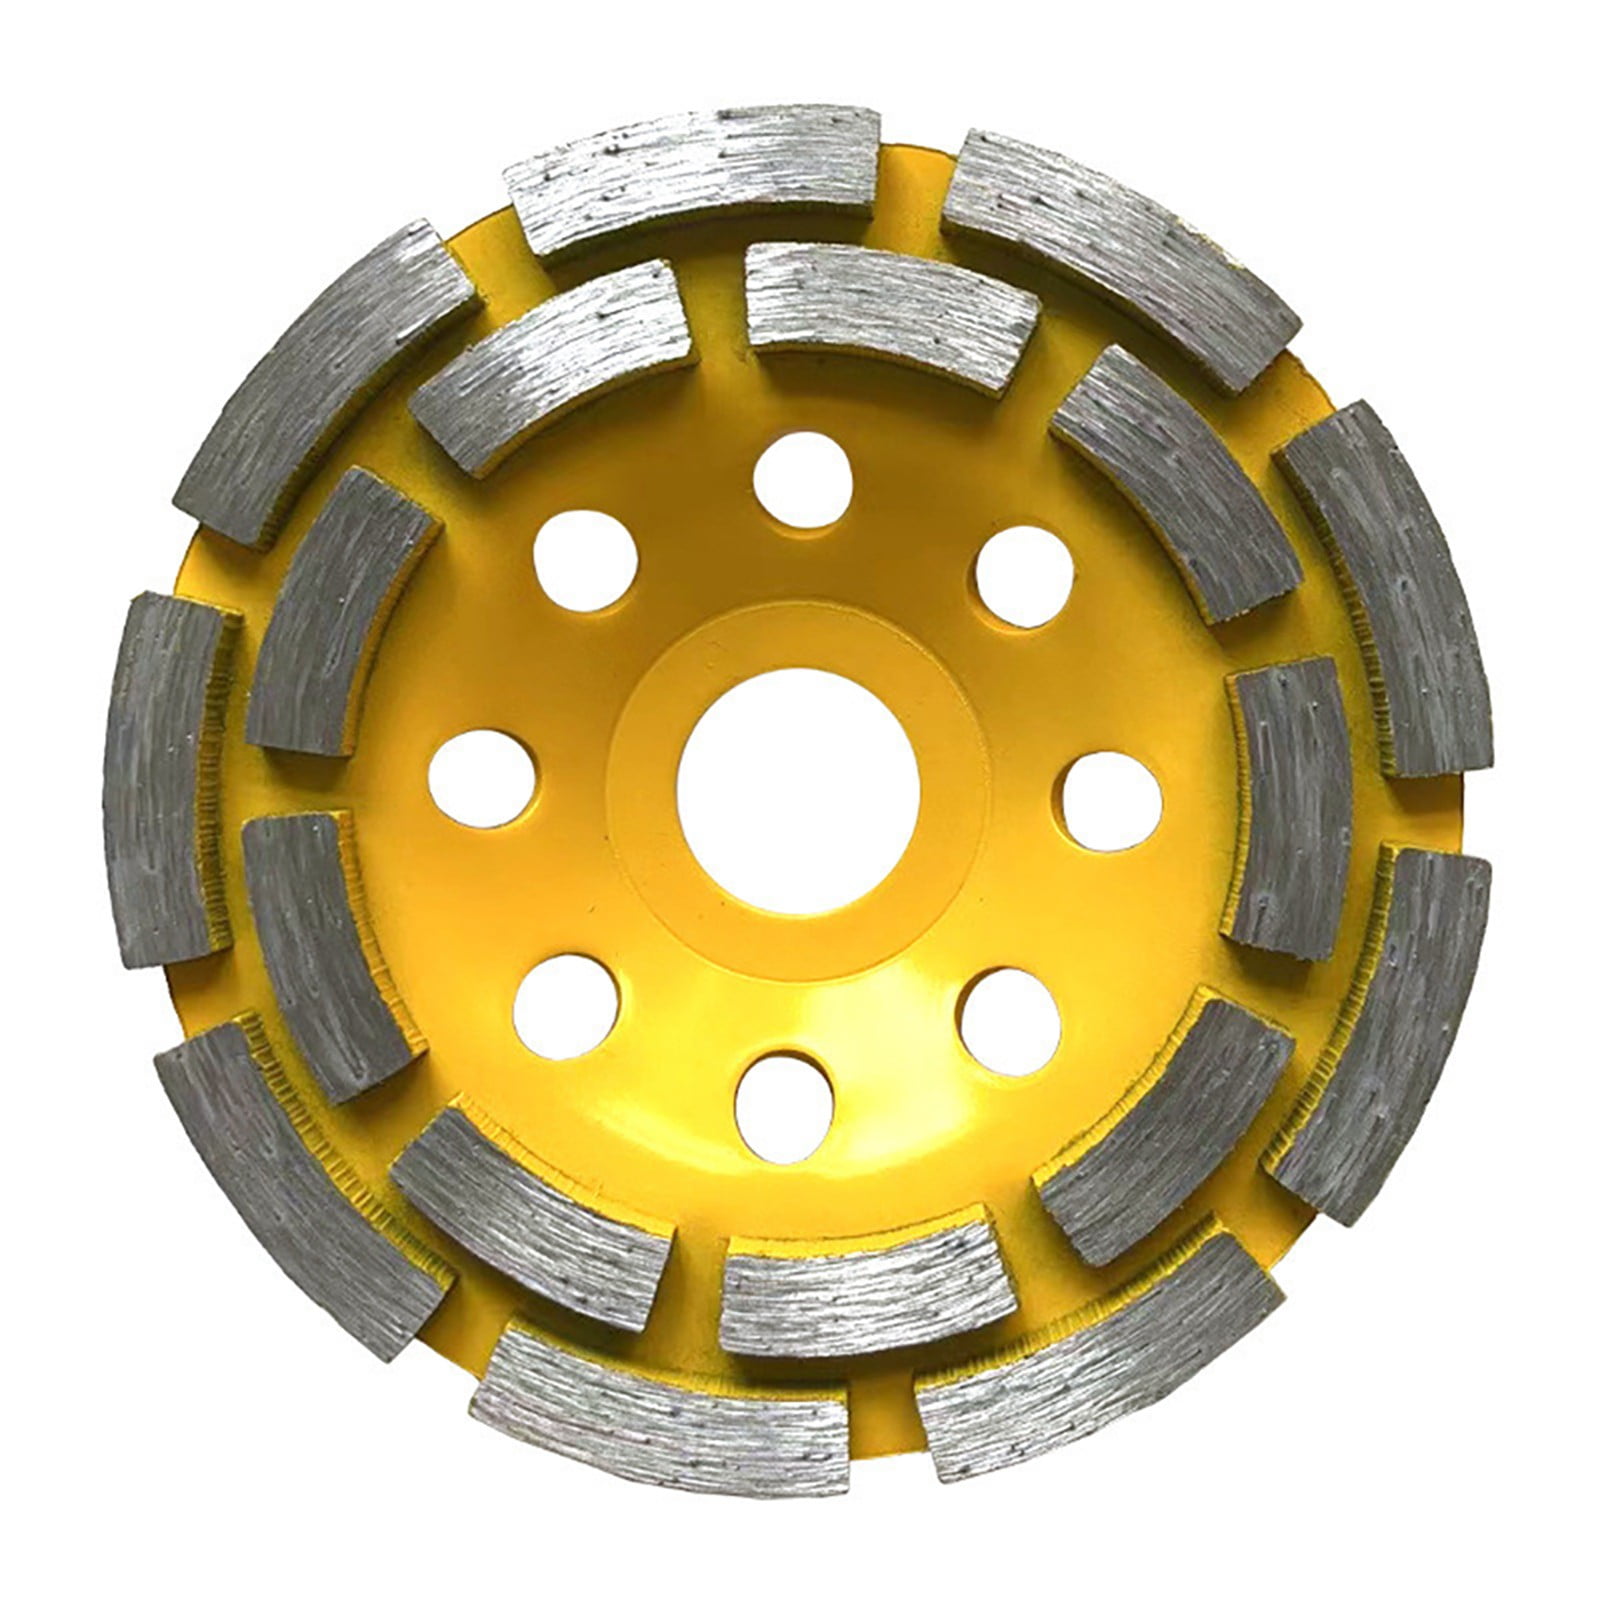 4.5 inch Diamond Cup Grinding Wheel for Concrete Grinding